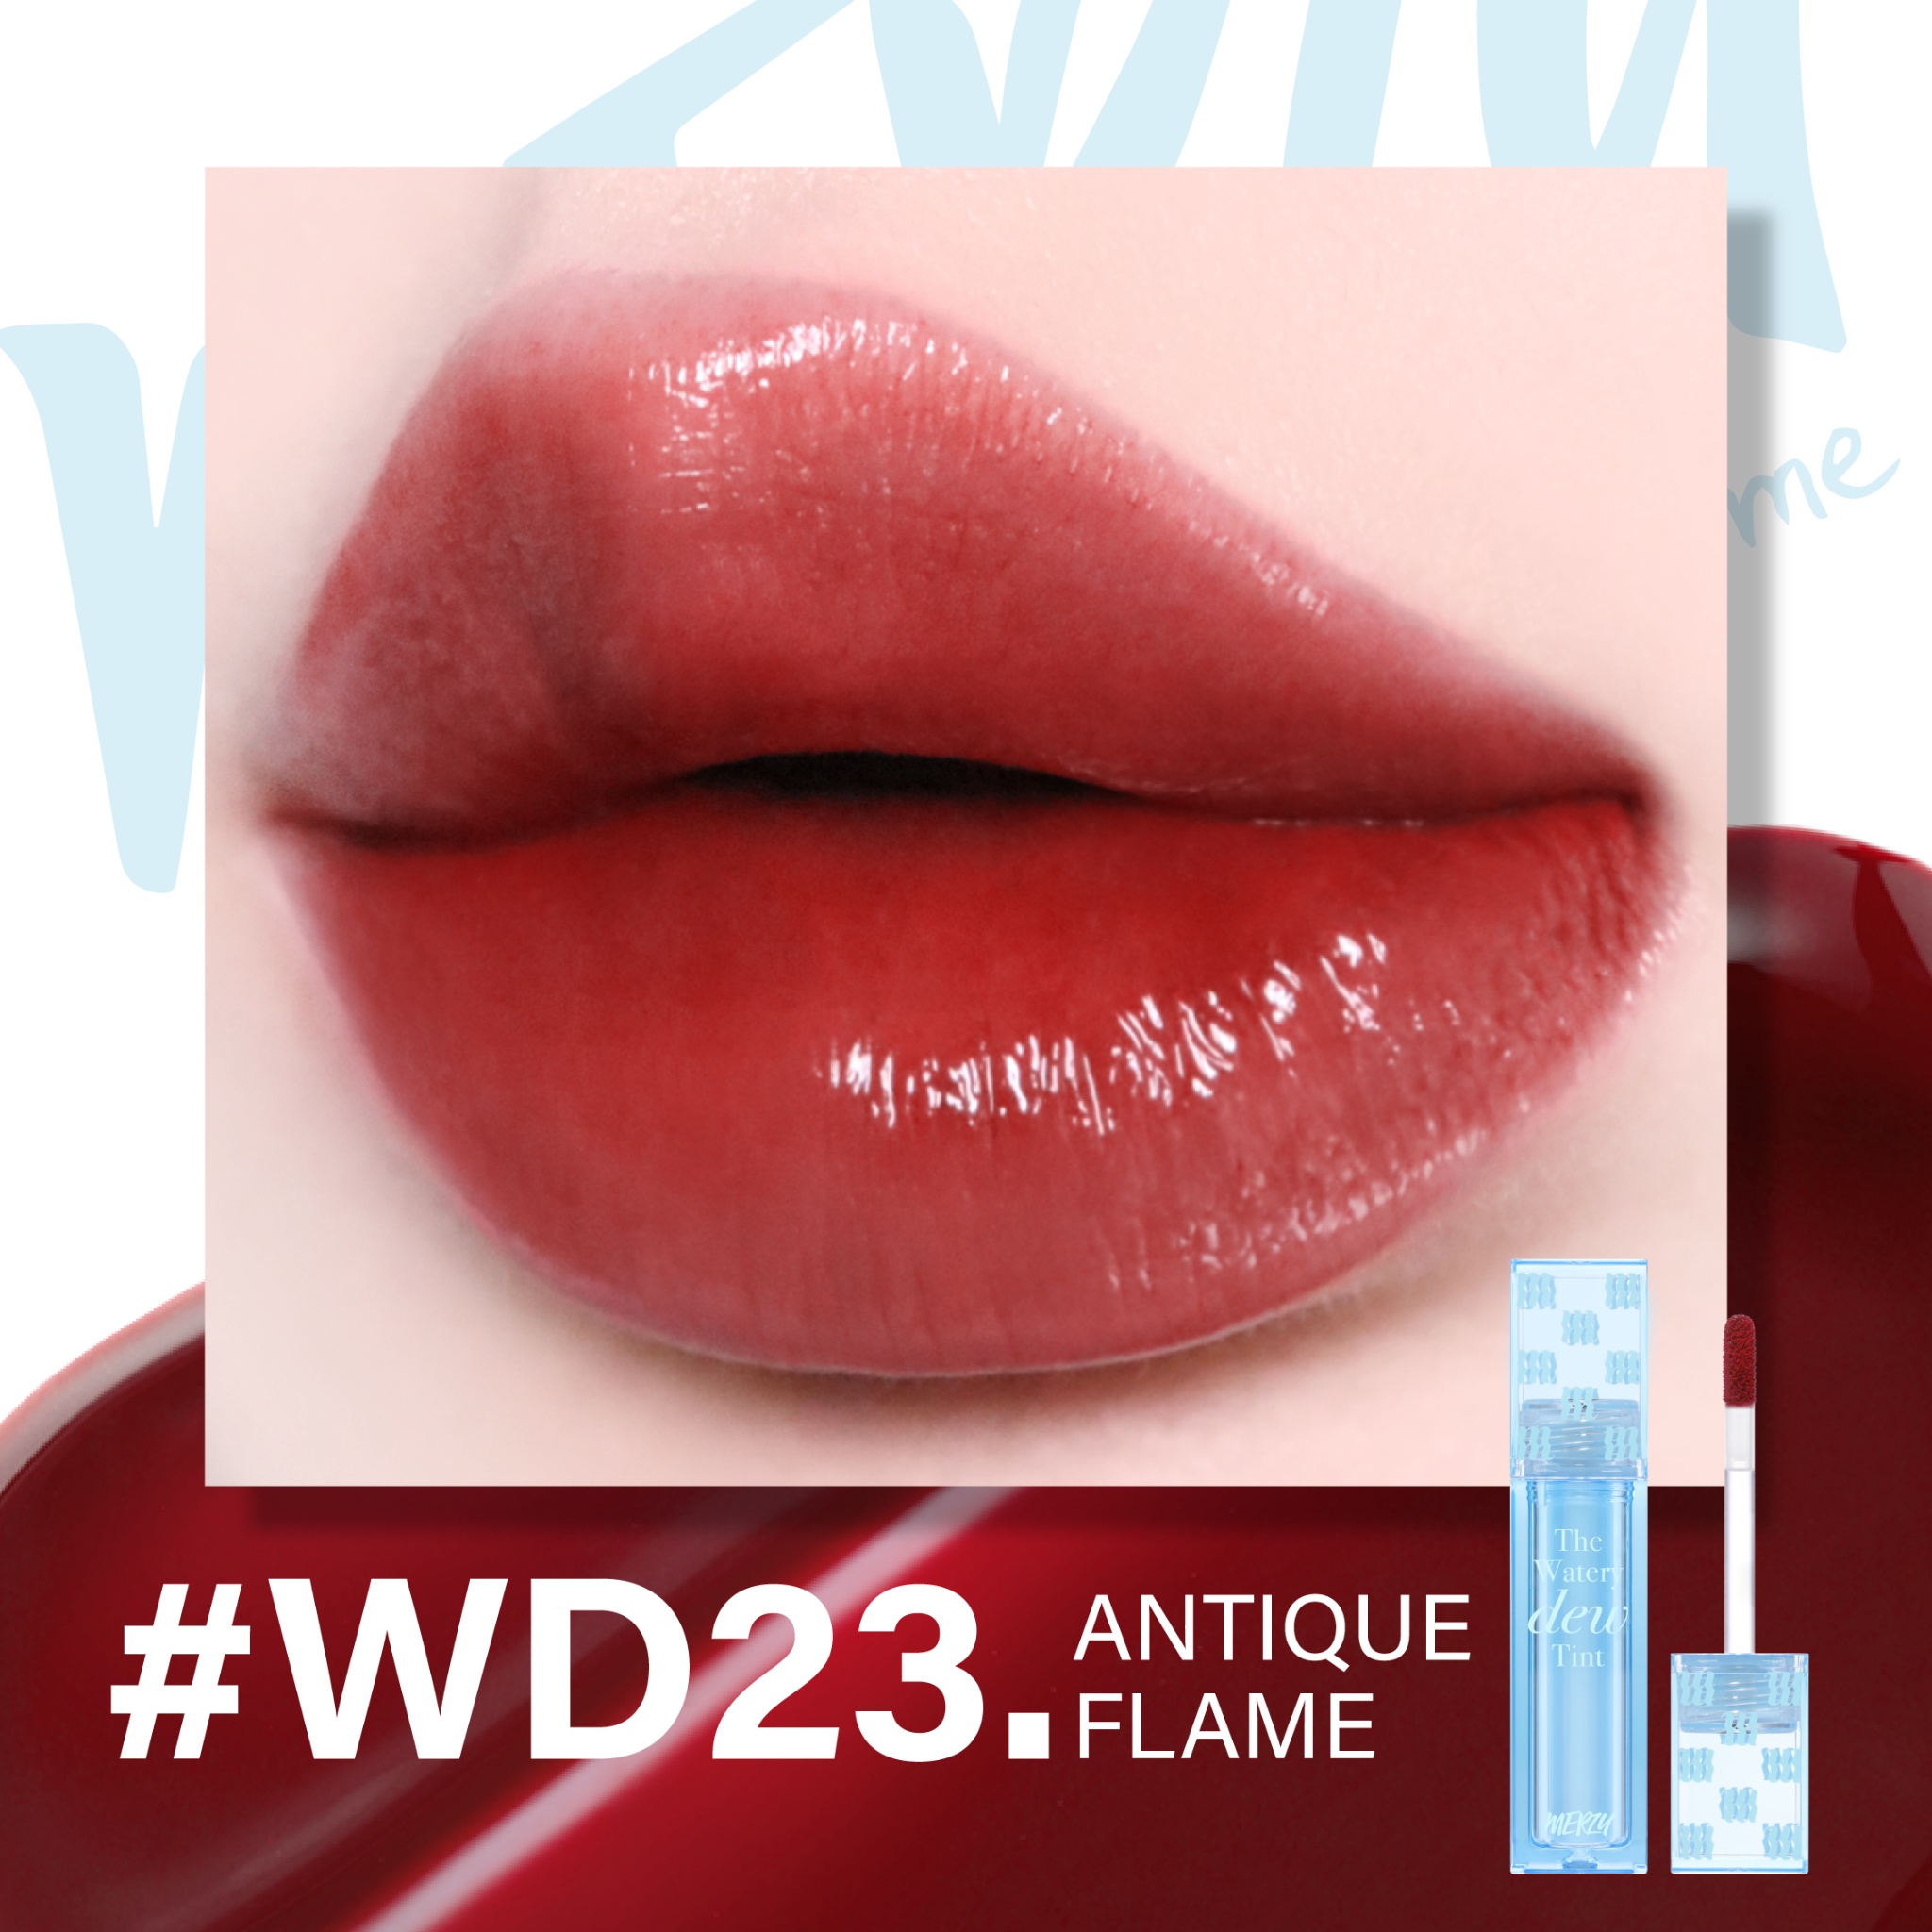 (New)(Ver.4) Son Tint Bóng Merzy The Watery Dew Tint #WD23 Antique Flame